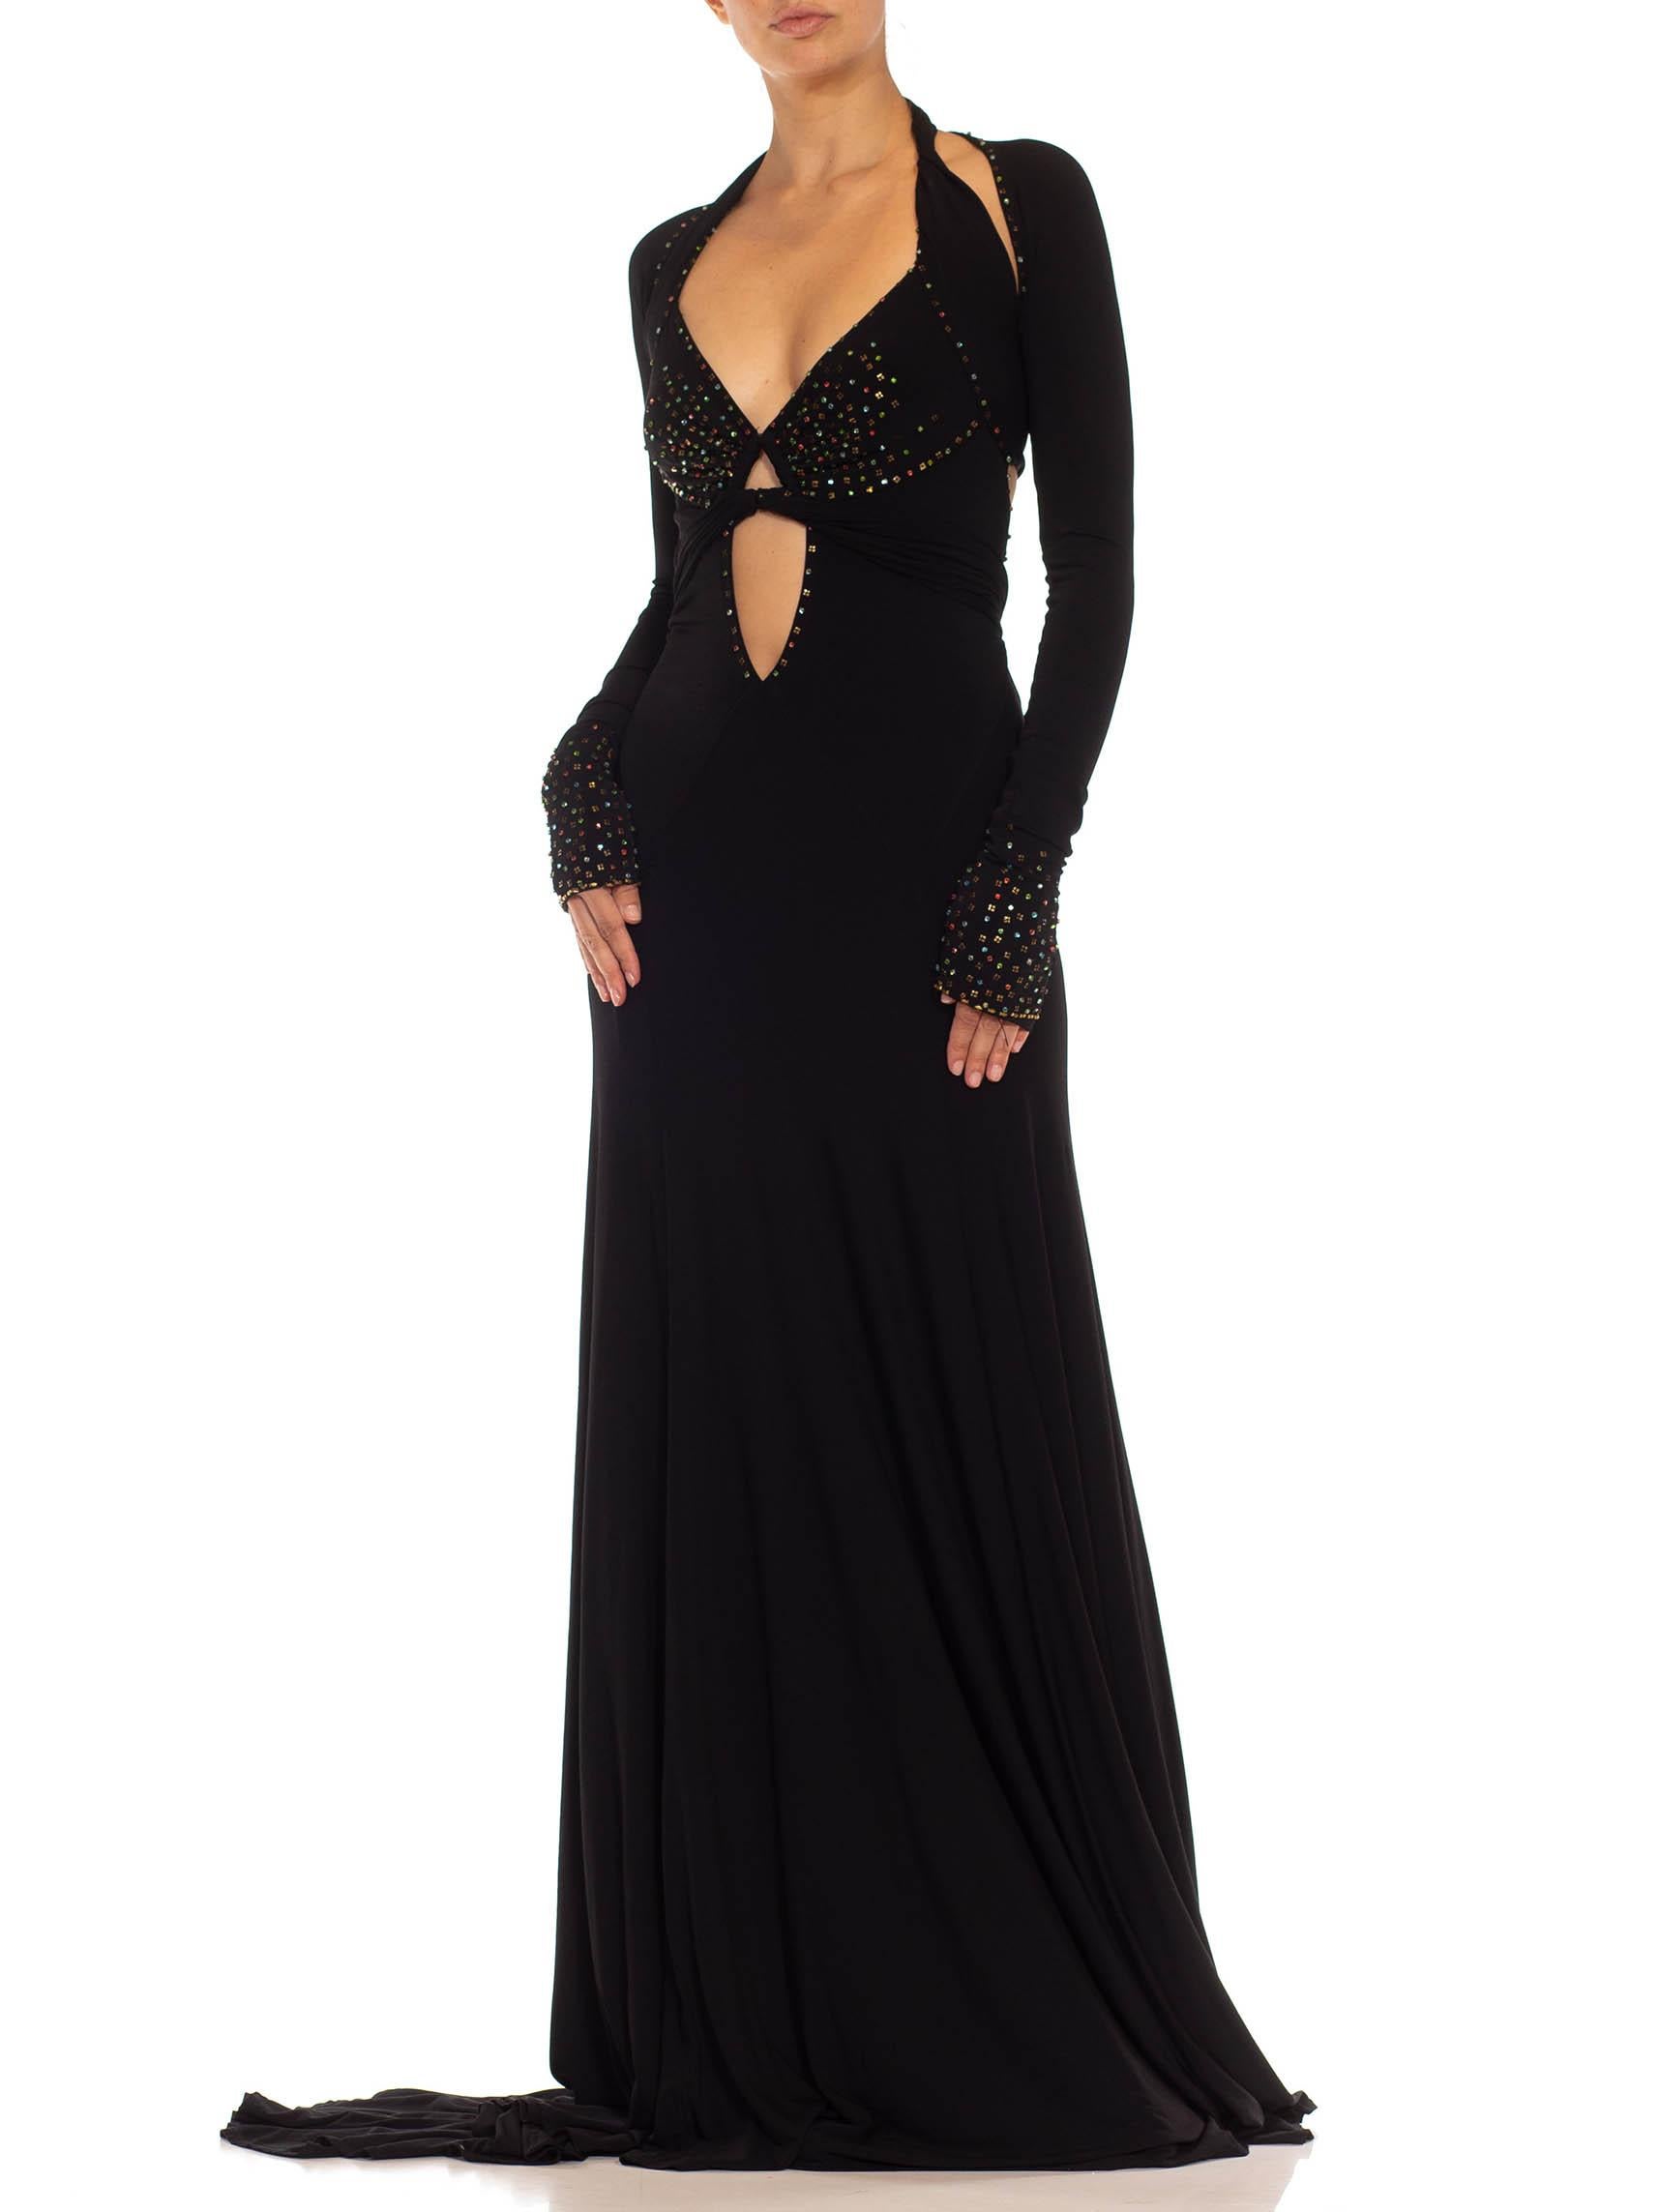 Women's 1990S Black Jersey Sexy Slinky Rhinestone Halter Neck Gown With Arm Sleeve Piece For Sale